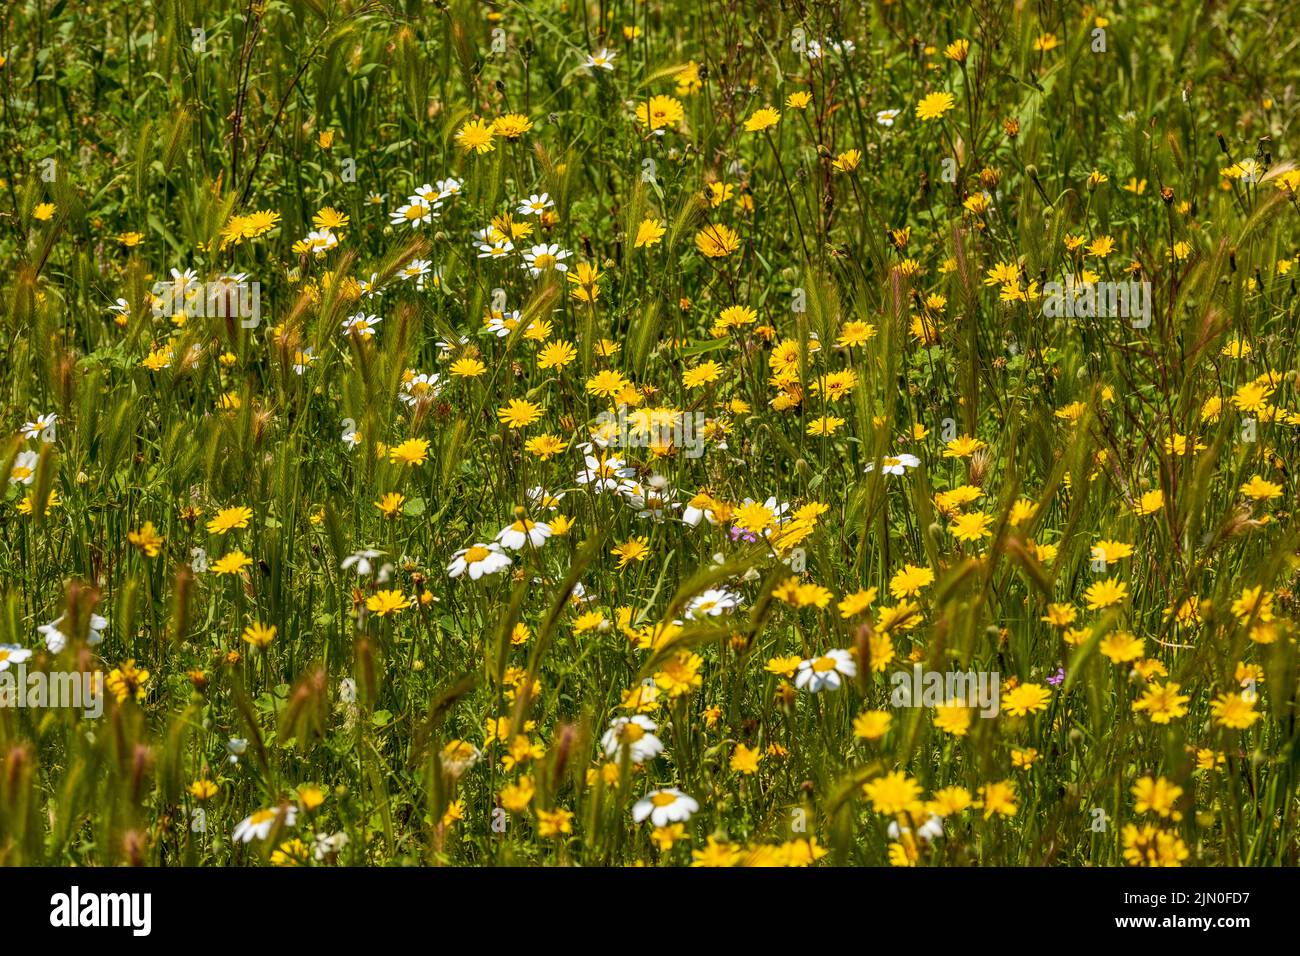 Wild flowers Yellow Dandelions and White Daisies in a Field in the Almanzora Valley, Almeria province, Andalucía, Spain Stock Photo